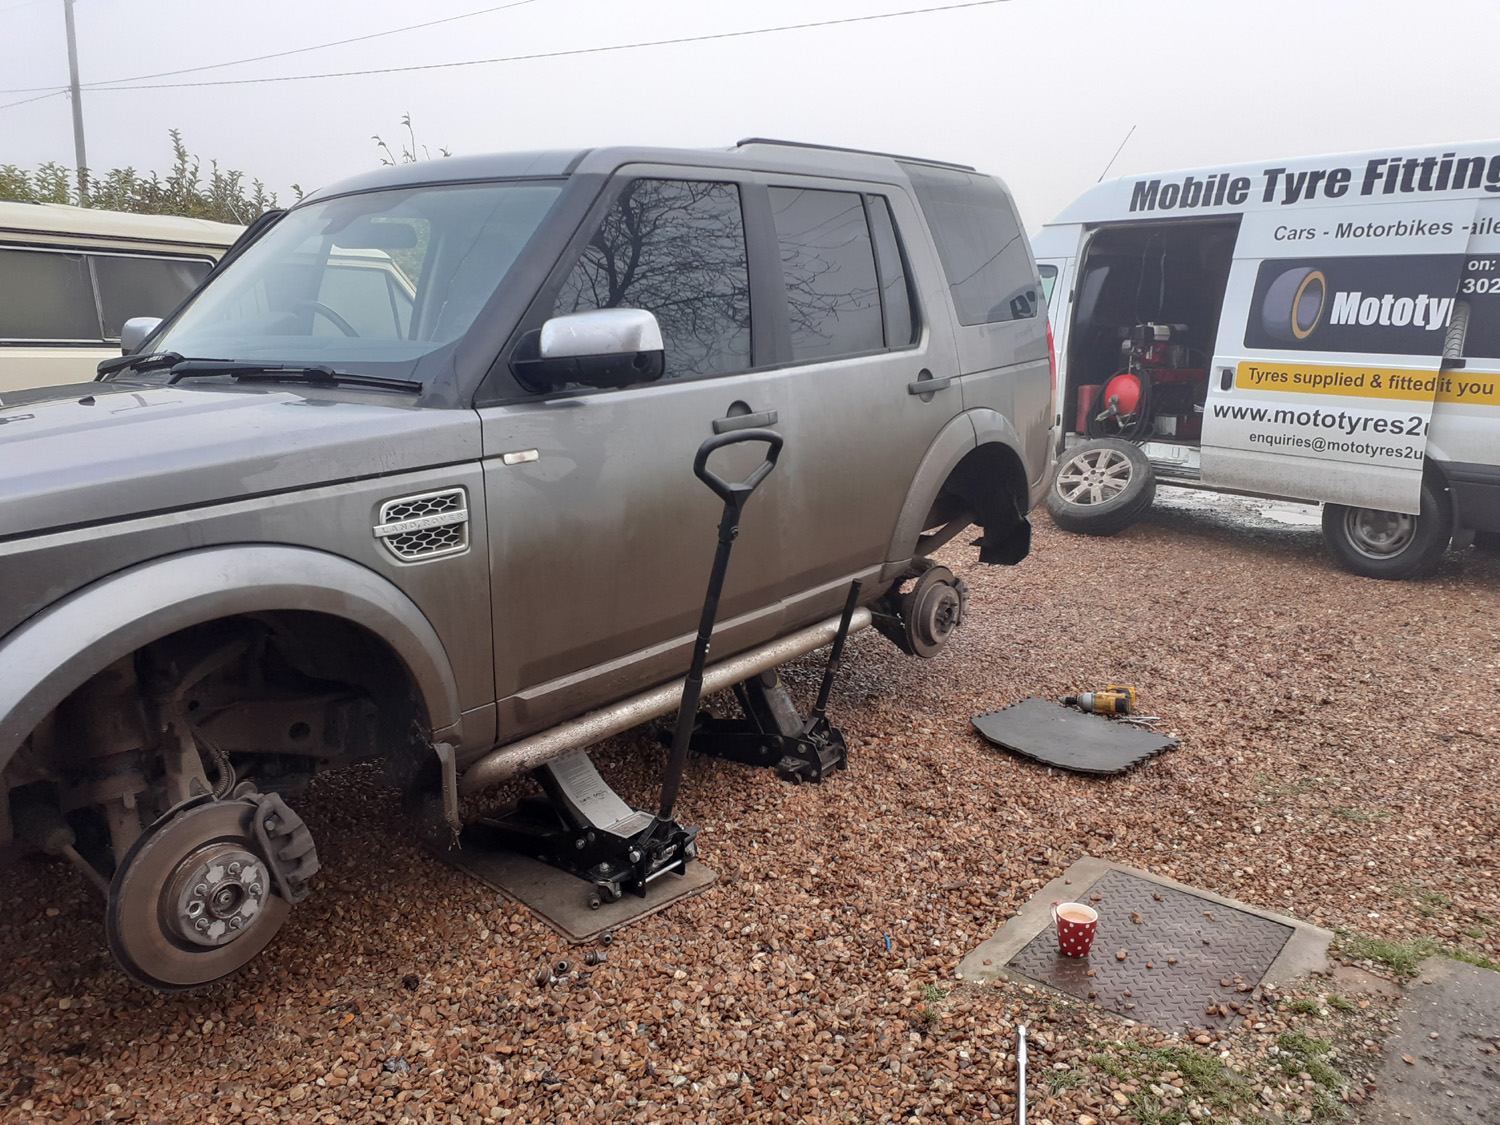 Mototyres 2 u Mobile Tyre fitting Lincolnshire Holbeach Tyres Land Rover Discovery 4x4 new tyres